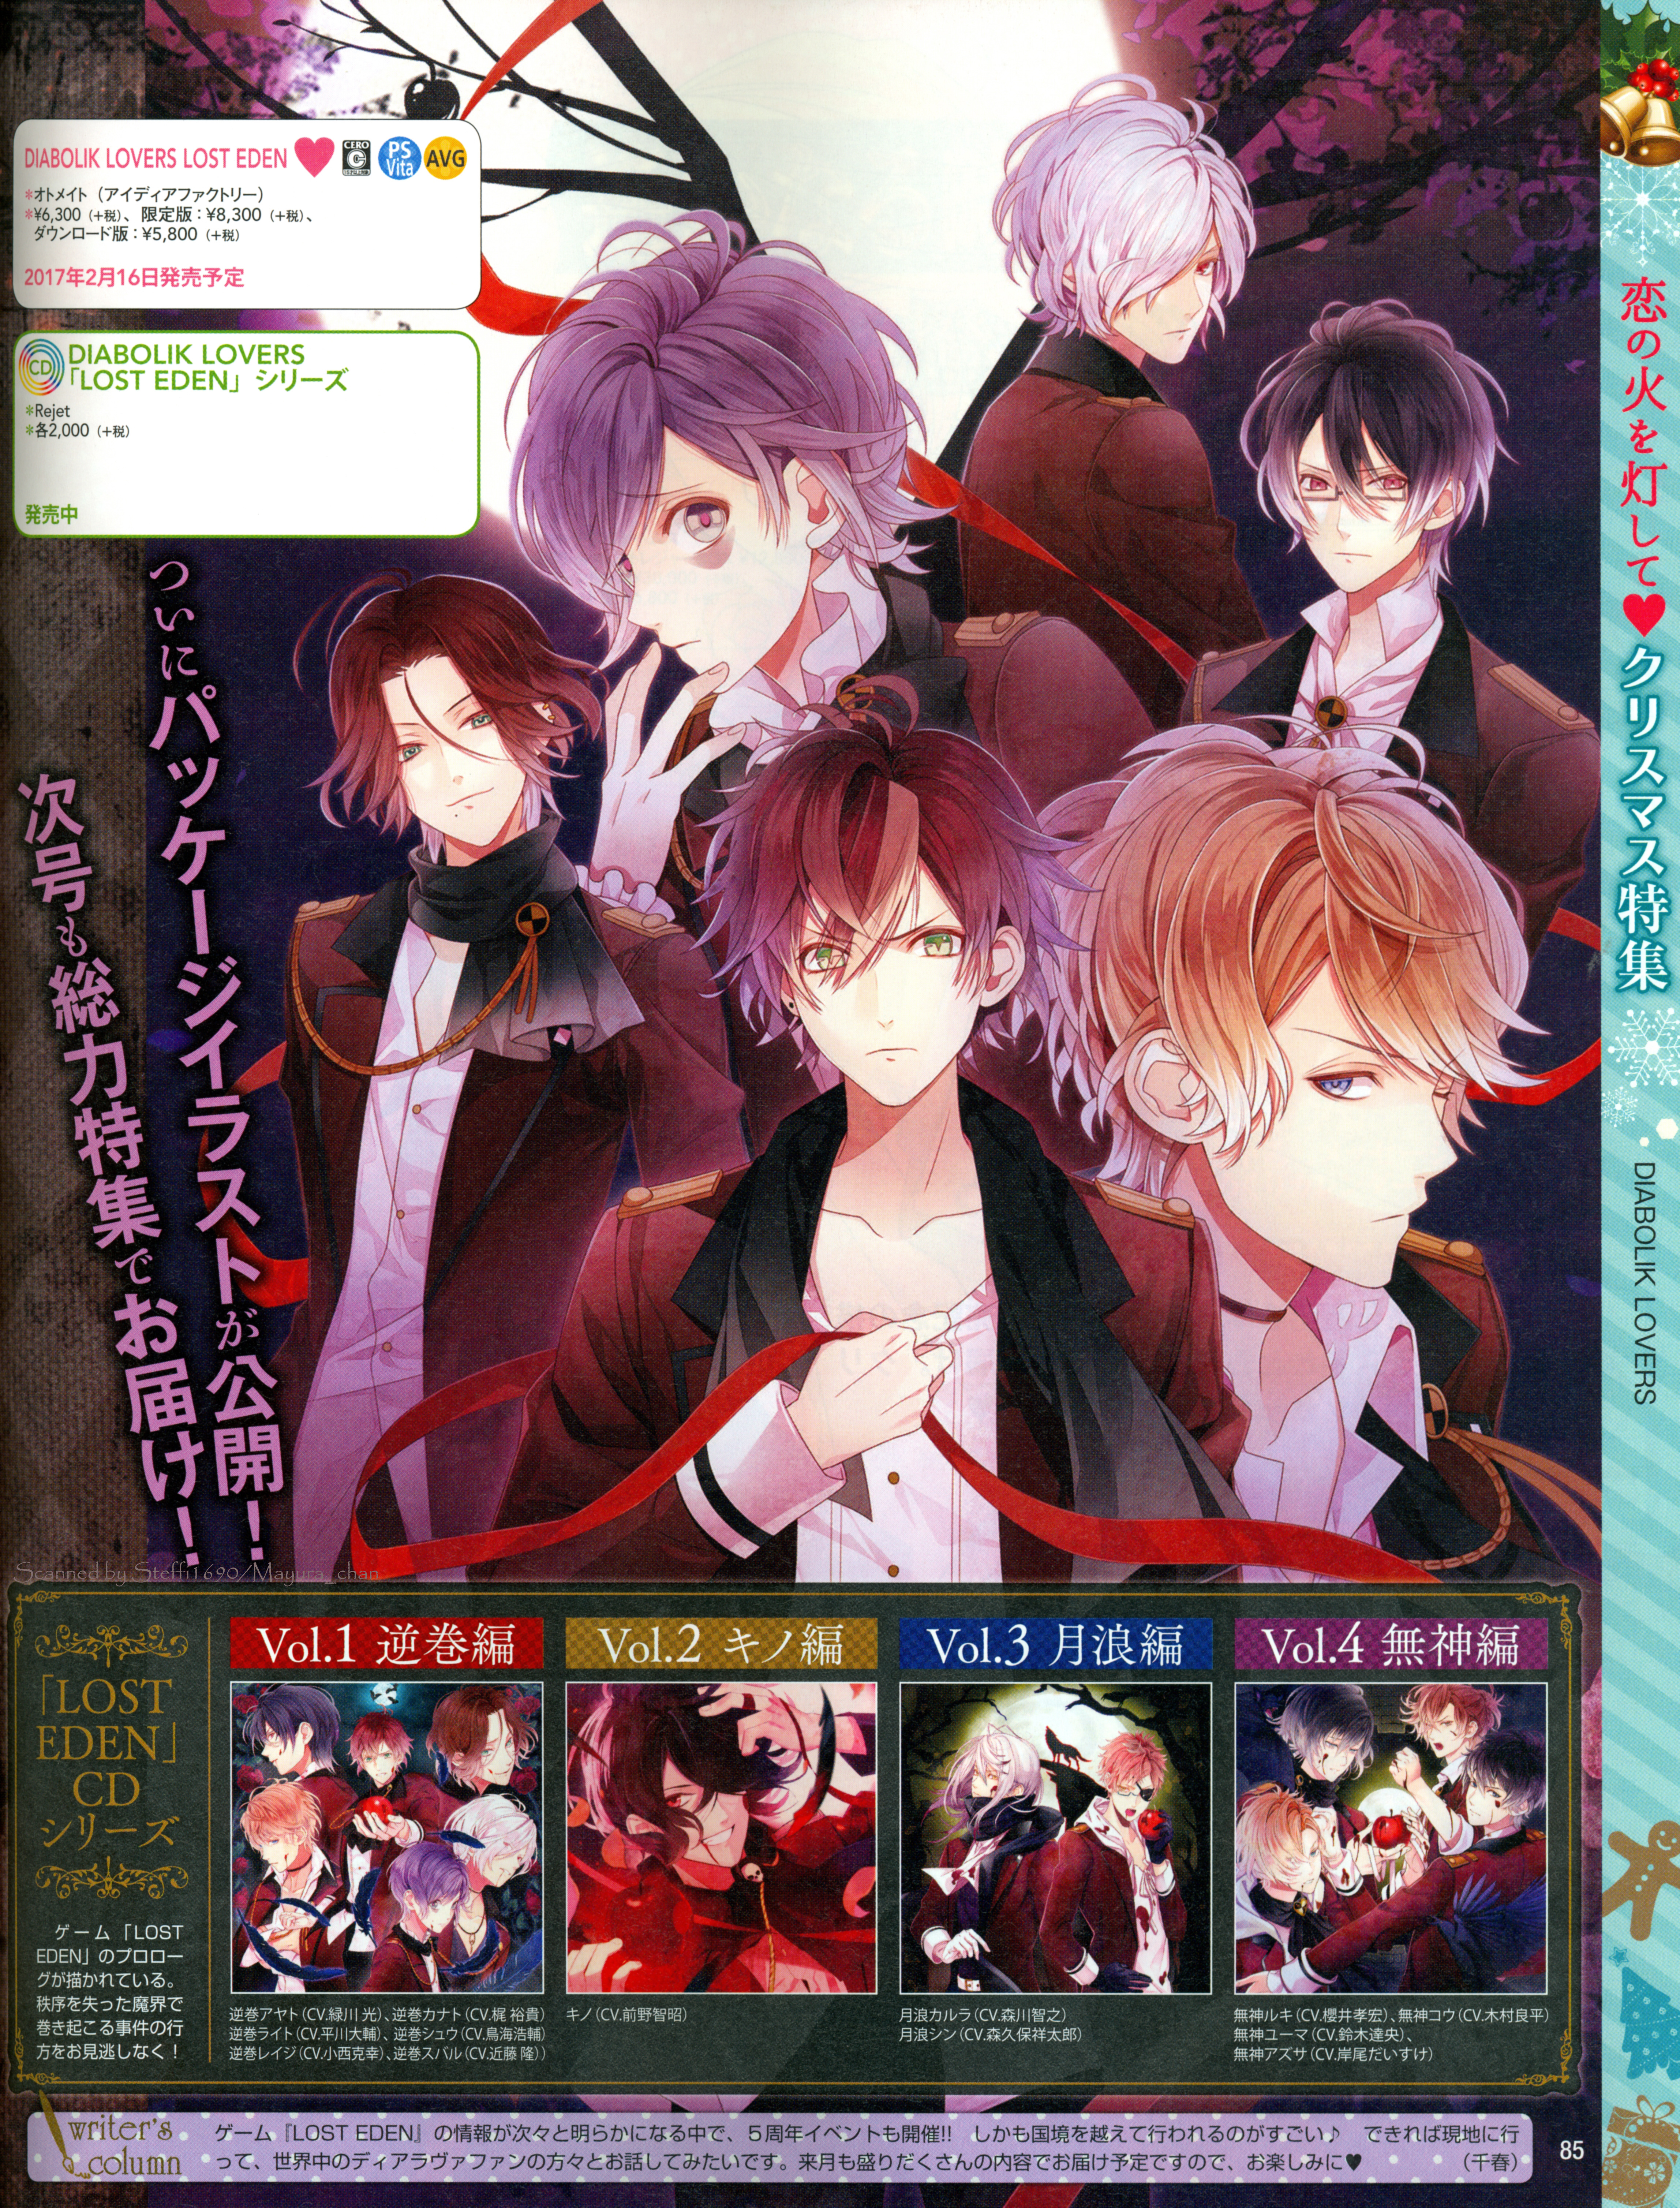 Amazing Diabolik Lovers Pictures & Backgrounds